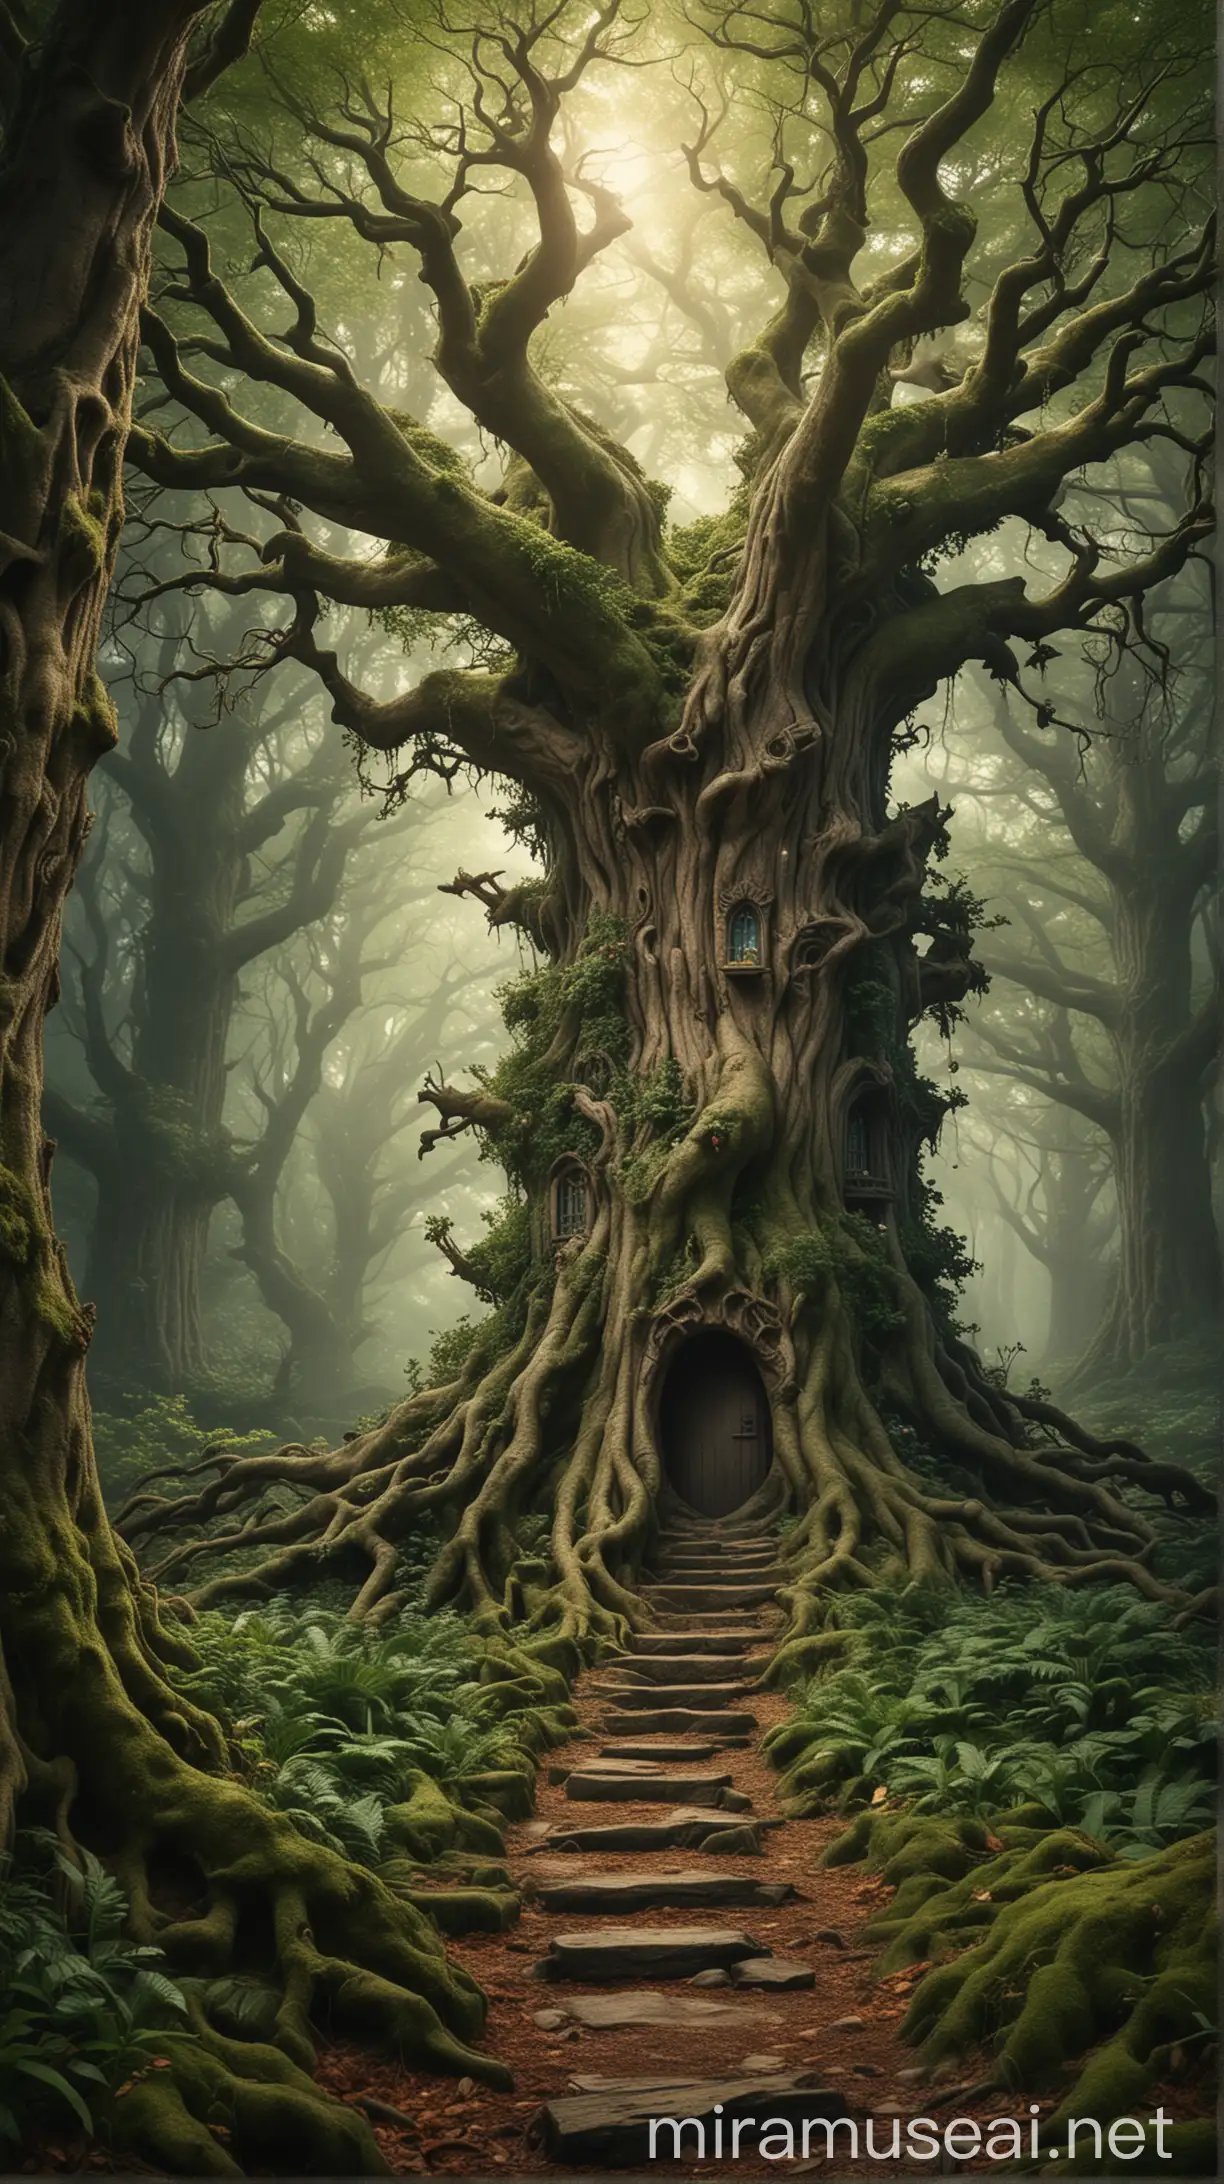 6. A mystical forest teeming with mythical creatures, a wise old tree at its heart, and a hidden path leading to an enchanted realm.